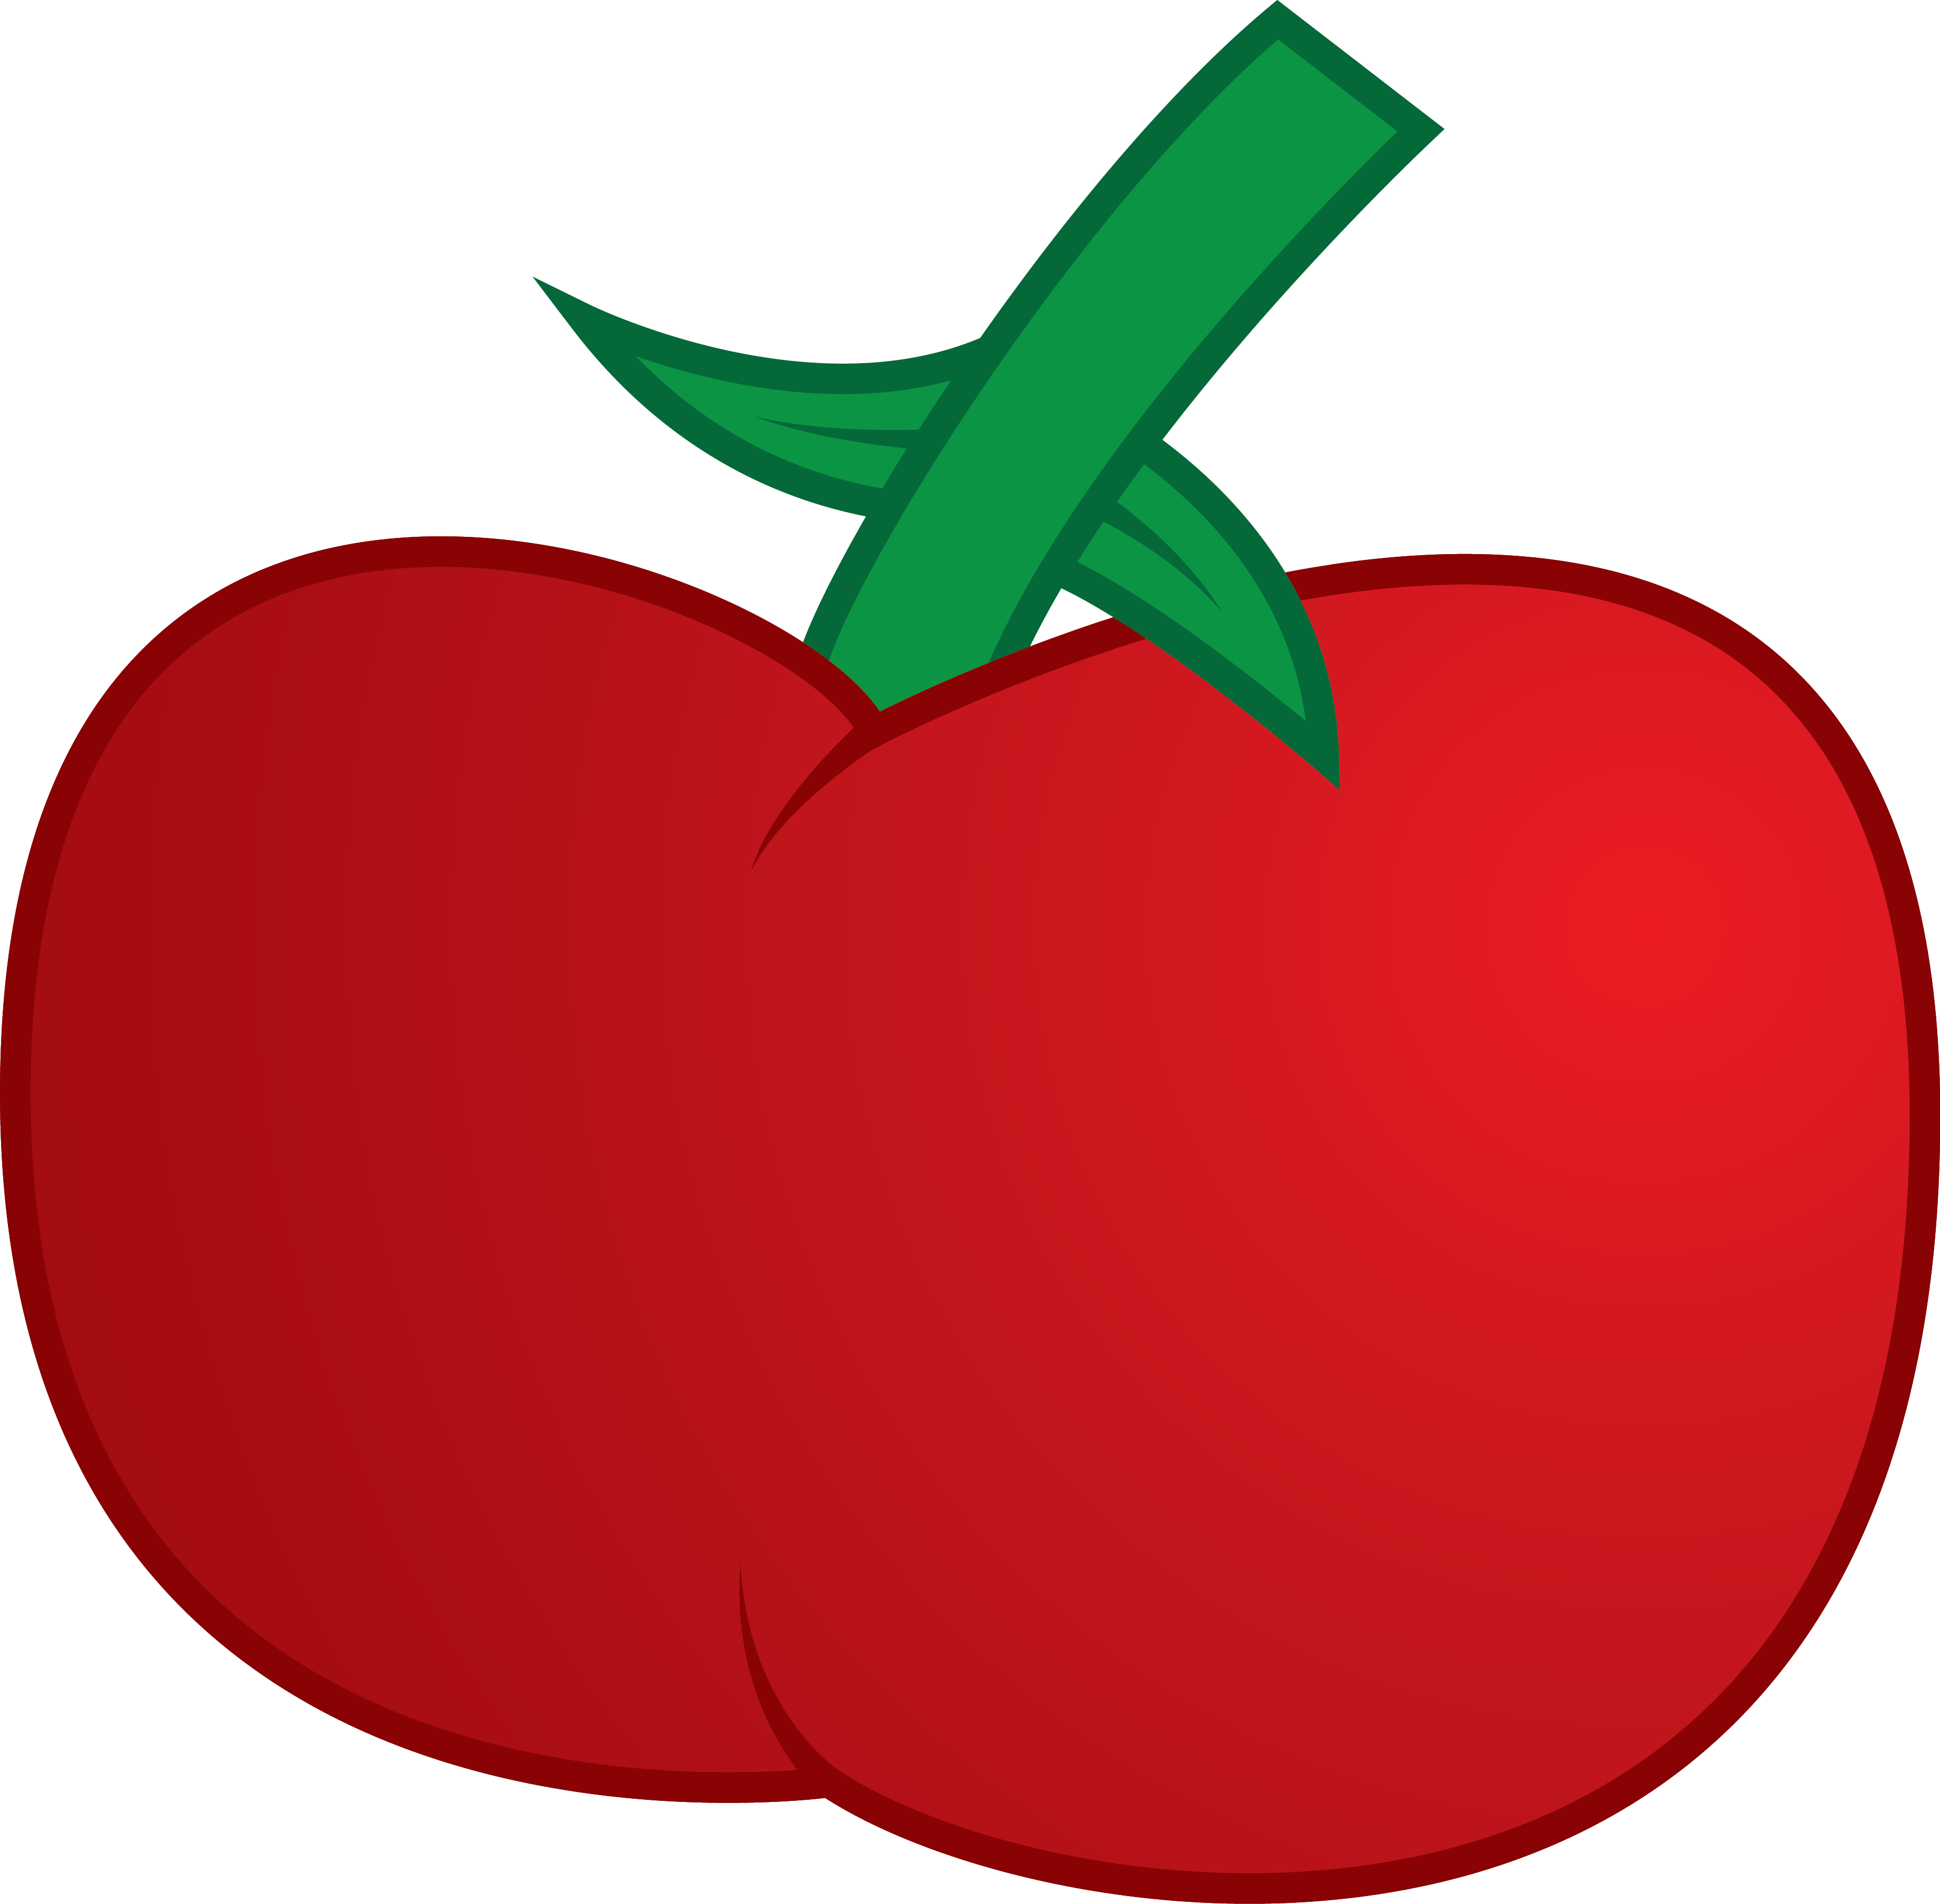 tomatoes clipart red tomato